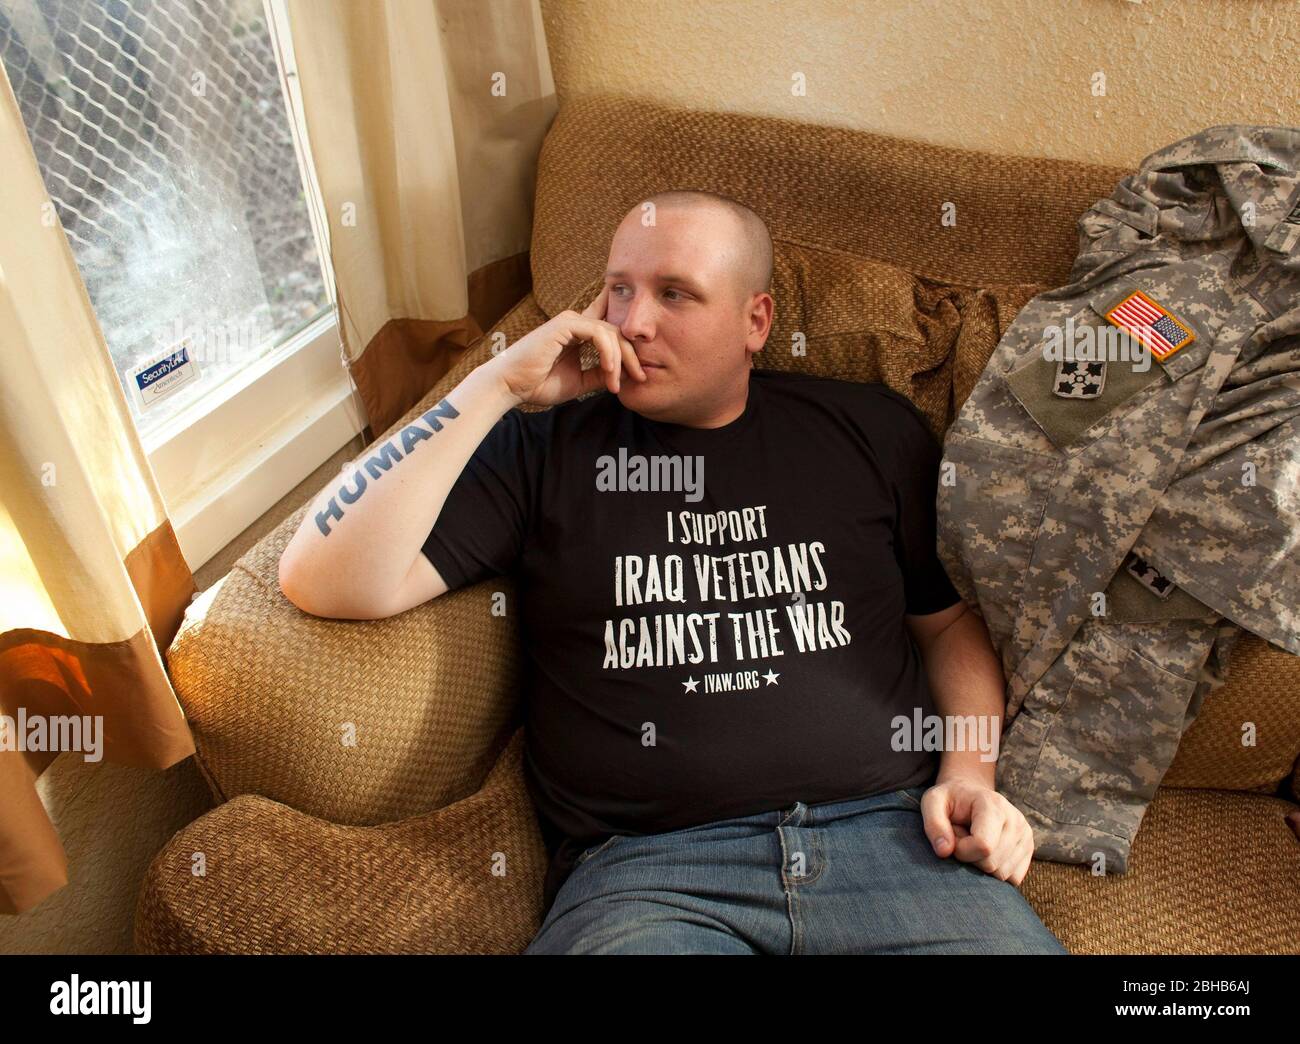 Killeen Texas USA, March 31 2010: Iraq War veteran Michael Kern, head of the group Iraq Veterans Against the War (IVAW) in the Under the Hood 'peace house' outside the sprawling Fort Hood Army base in central Texas. Kern, who suffers from Post Traumatic Stress Disorder (PTSD), is trying to obtain a medical discharge from the Army.   ©Bob Daemmrich Stock Photo